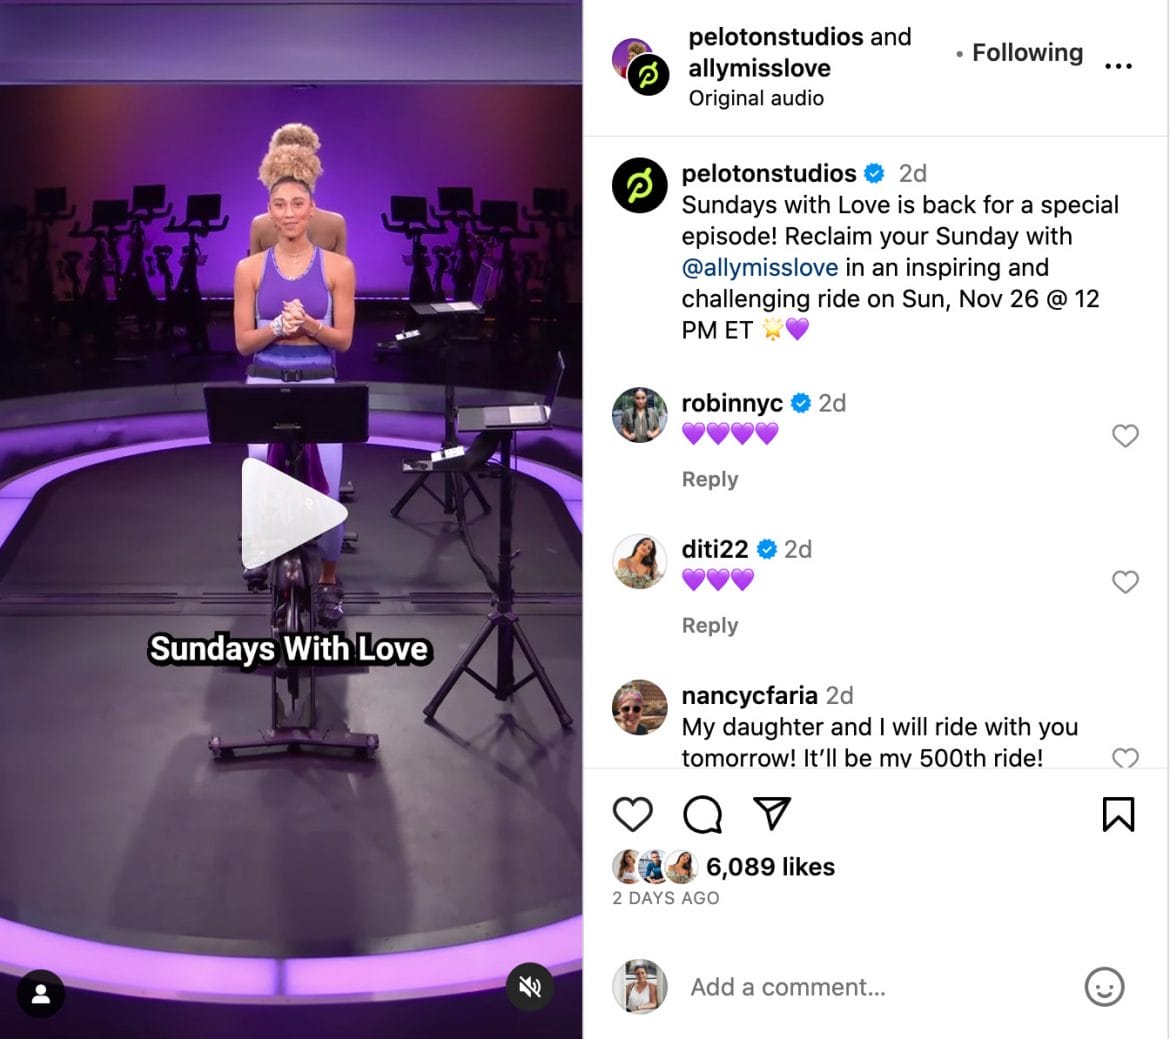 Peloton Instagram post about the return of Sundays with Love.